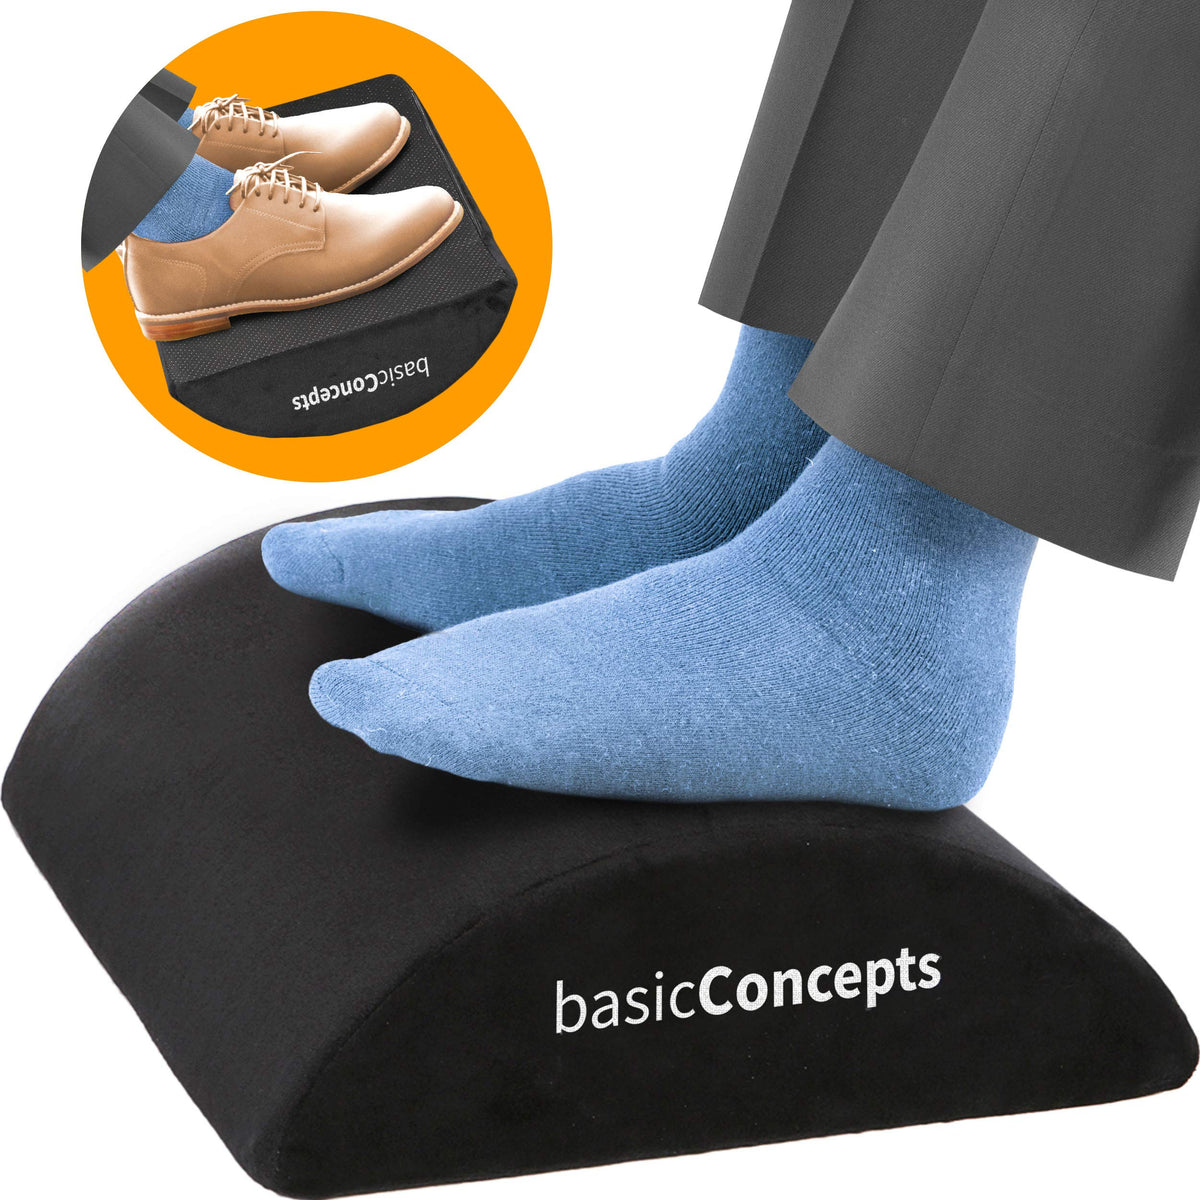 LightEase Ergonomic Footrest Under Desk Cushion for Work from Home, Office,  Gaming, Airplane, Comfortable Memory Foam